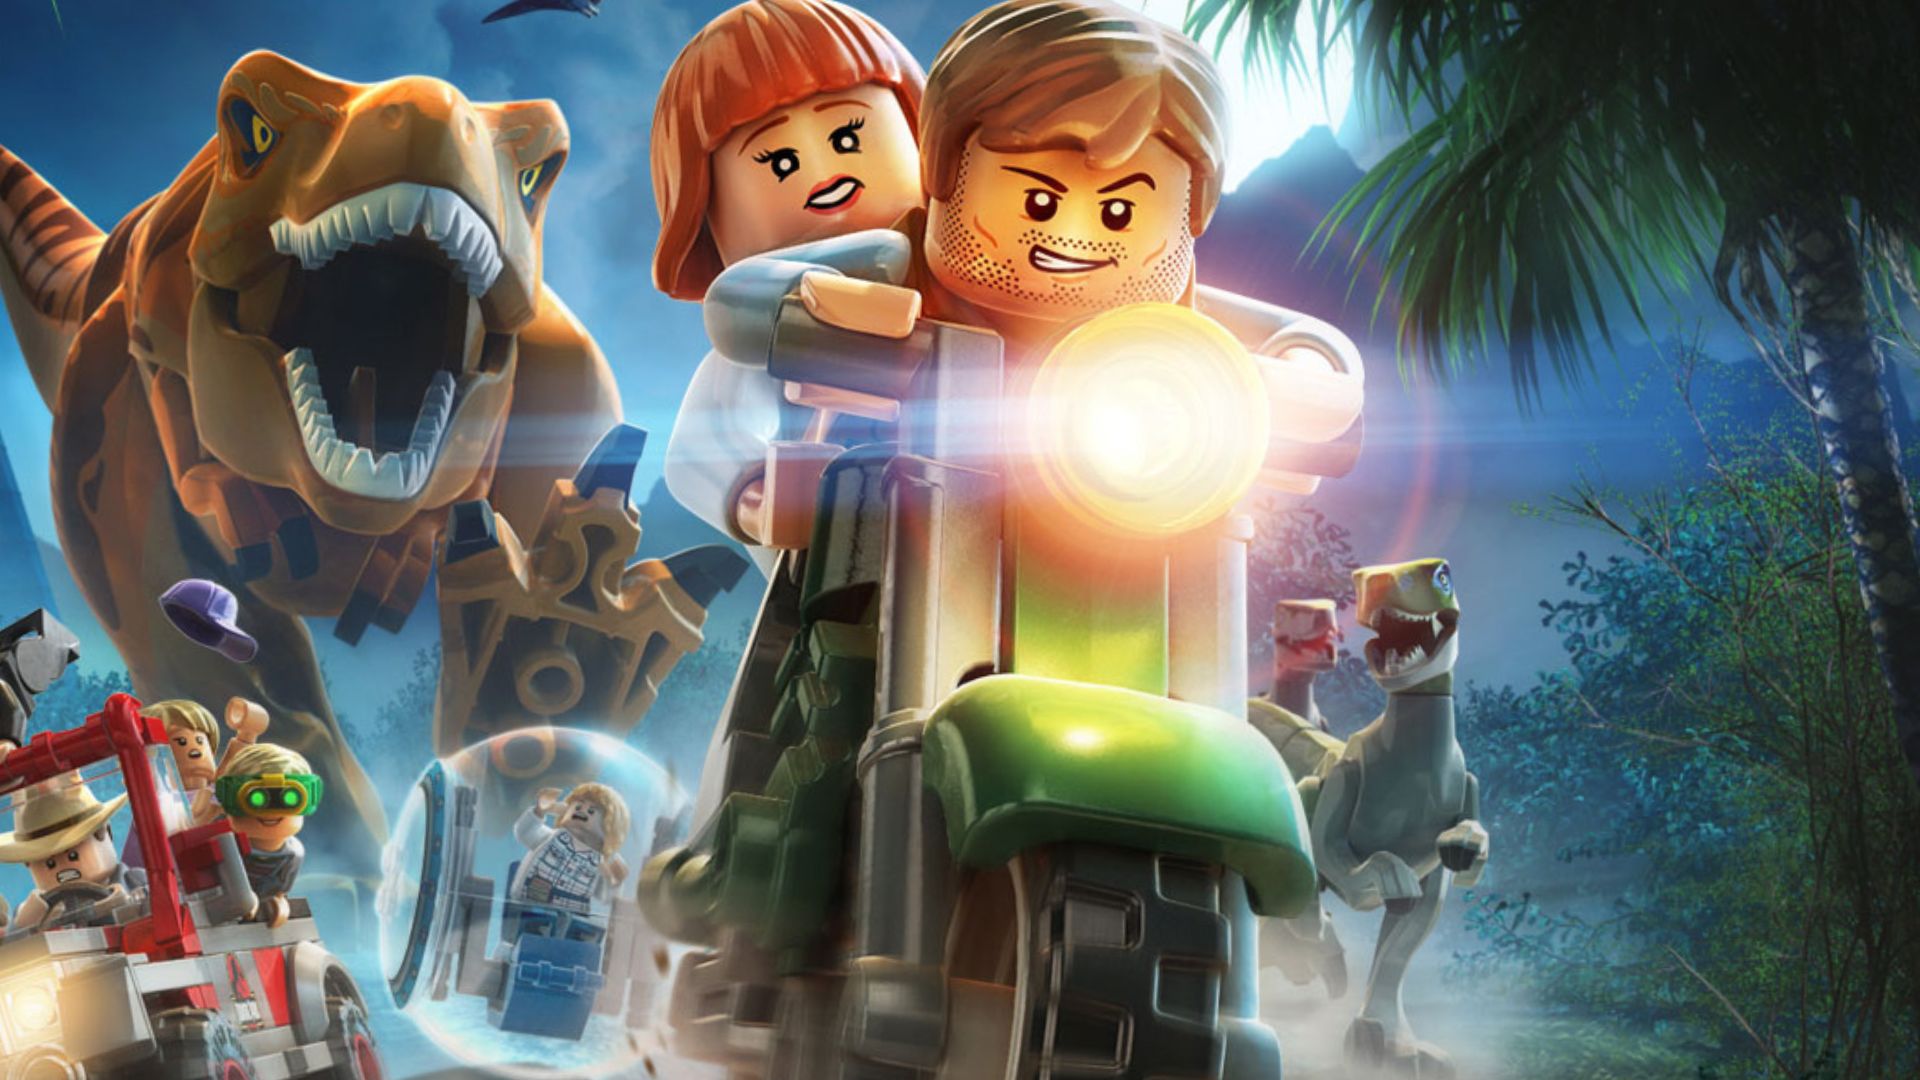 Jurassic World games - two lego characters on a motorbike running away from a giant T-rex coming out of the fog in the jungle.